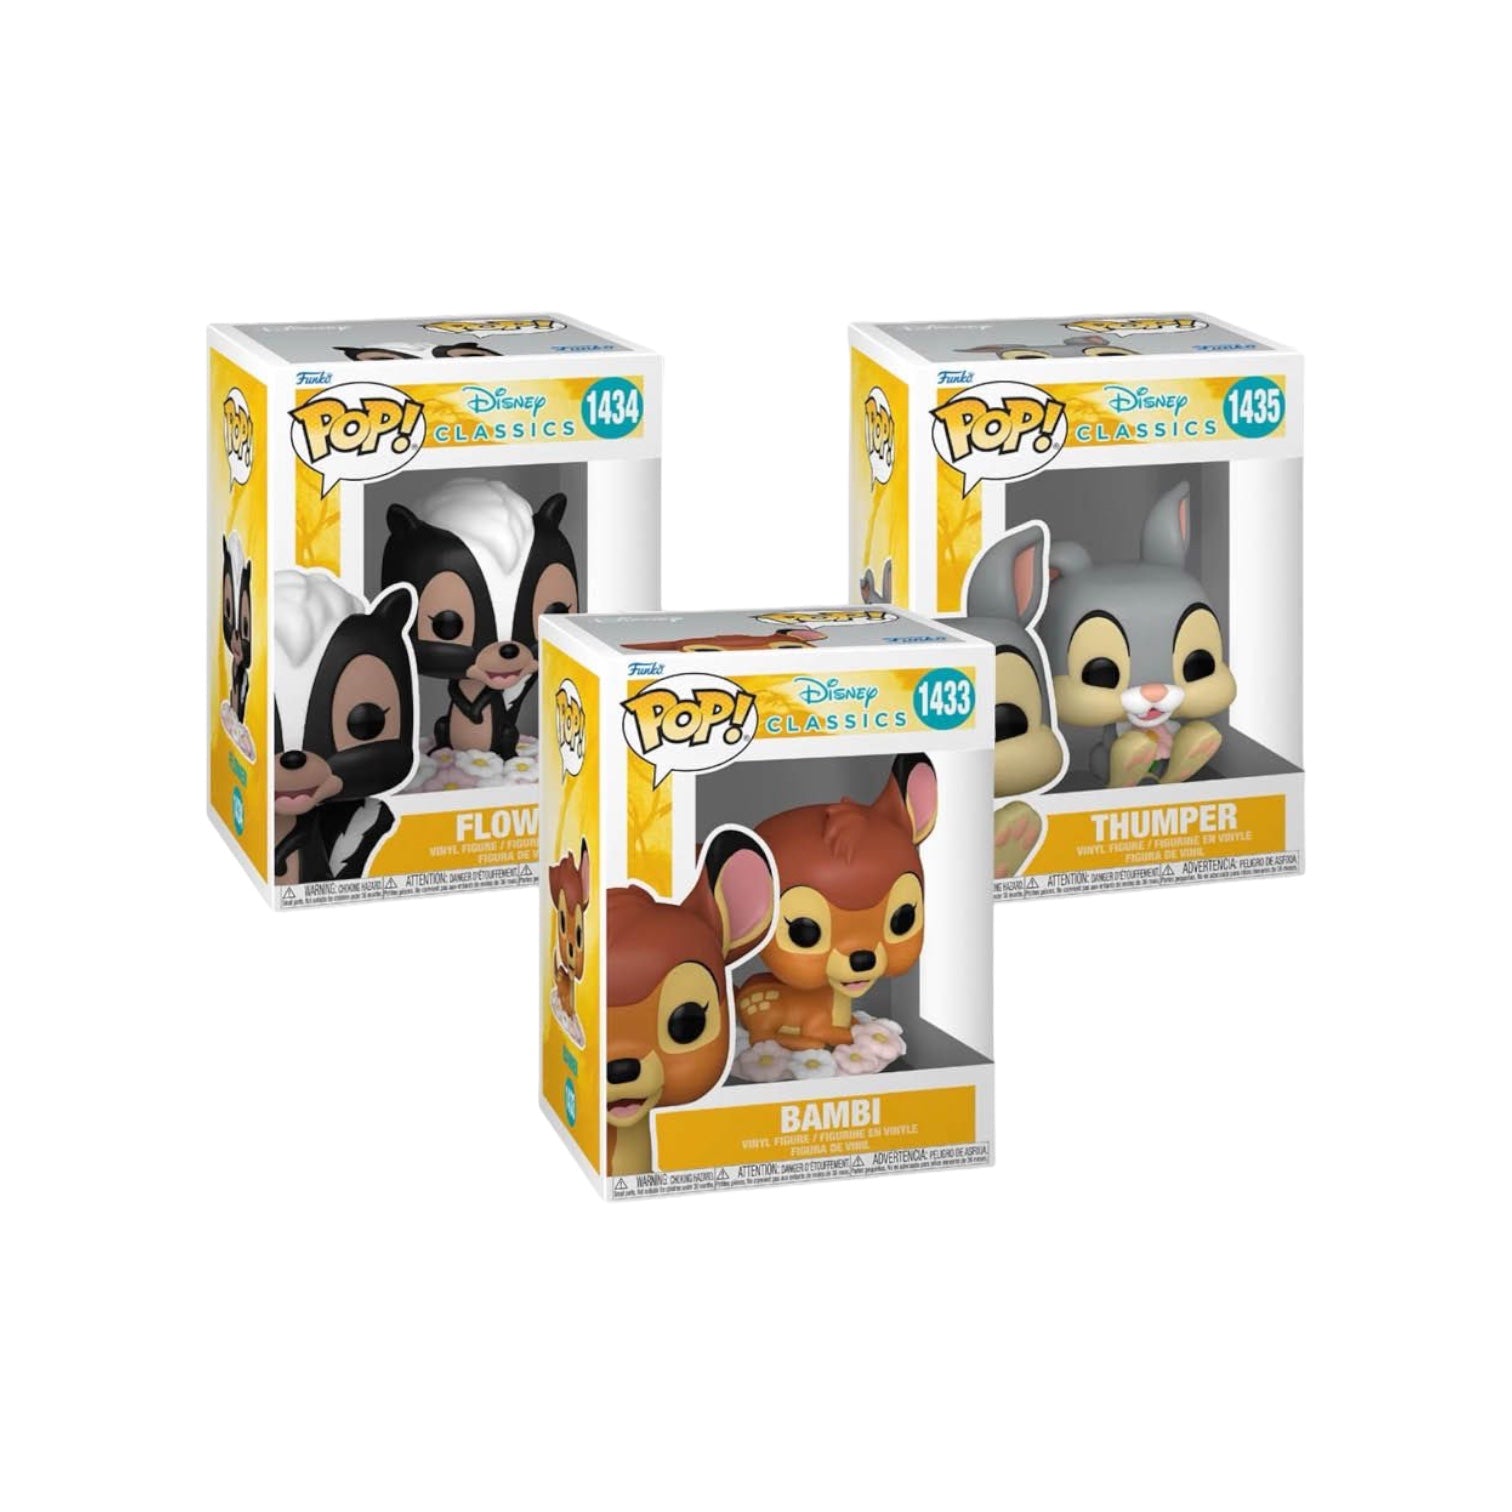 Special Offer - Bambi Bundle - Buy All 3 Bambi Funko Pops for £29.99